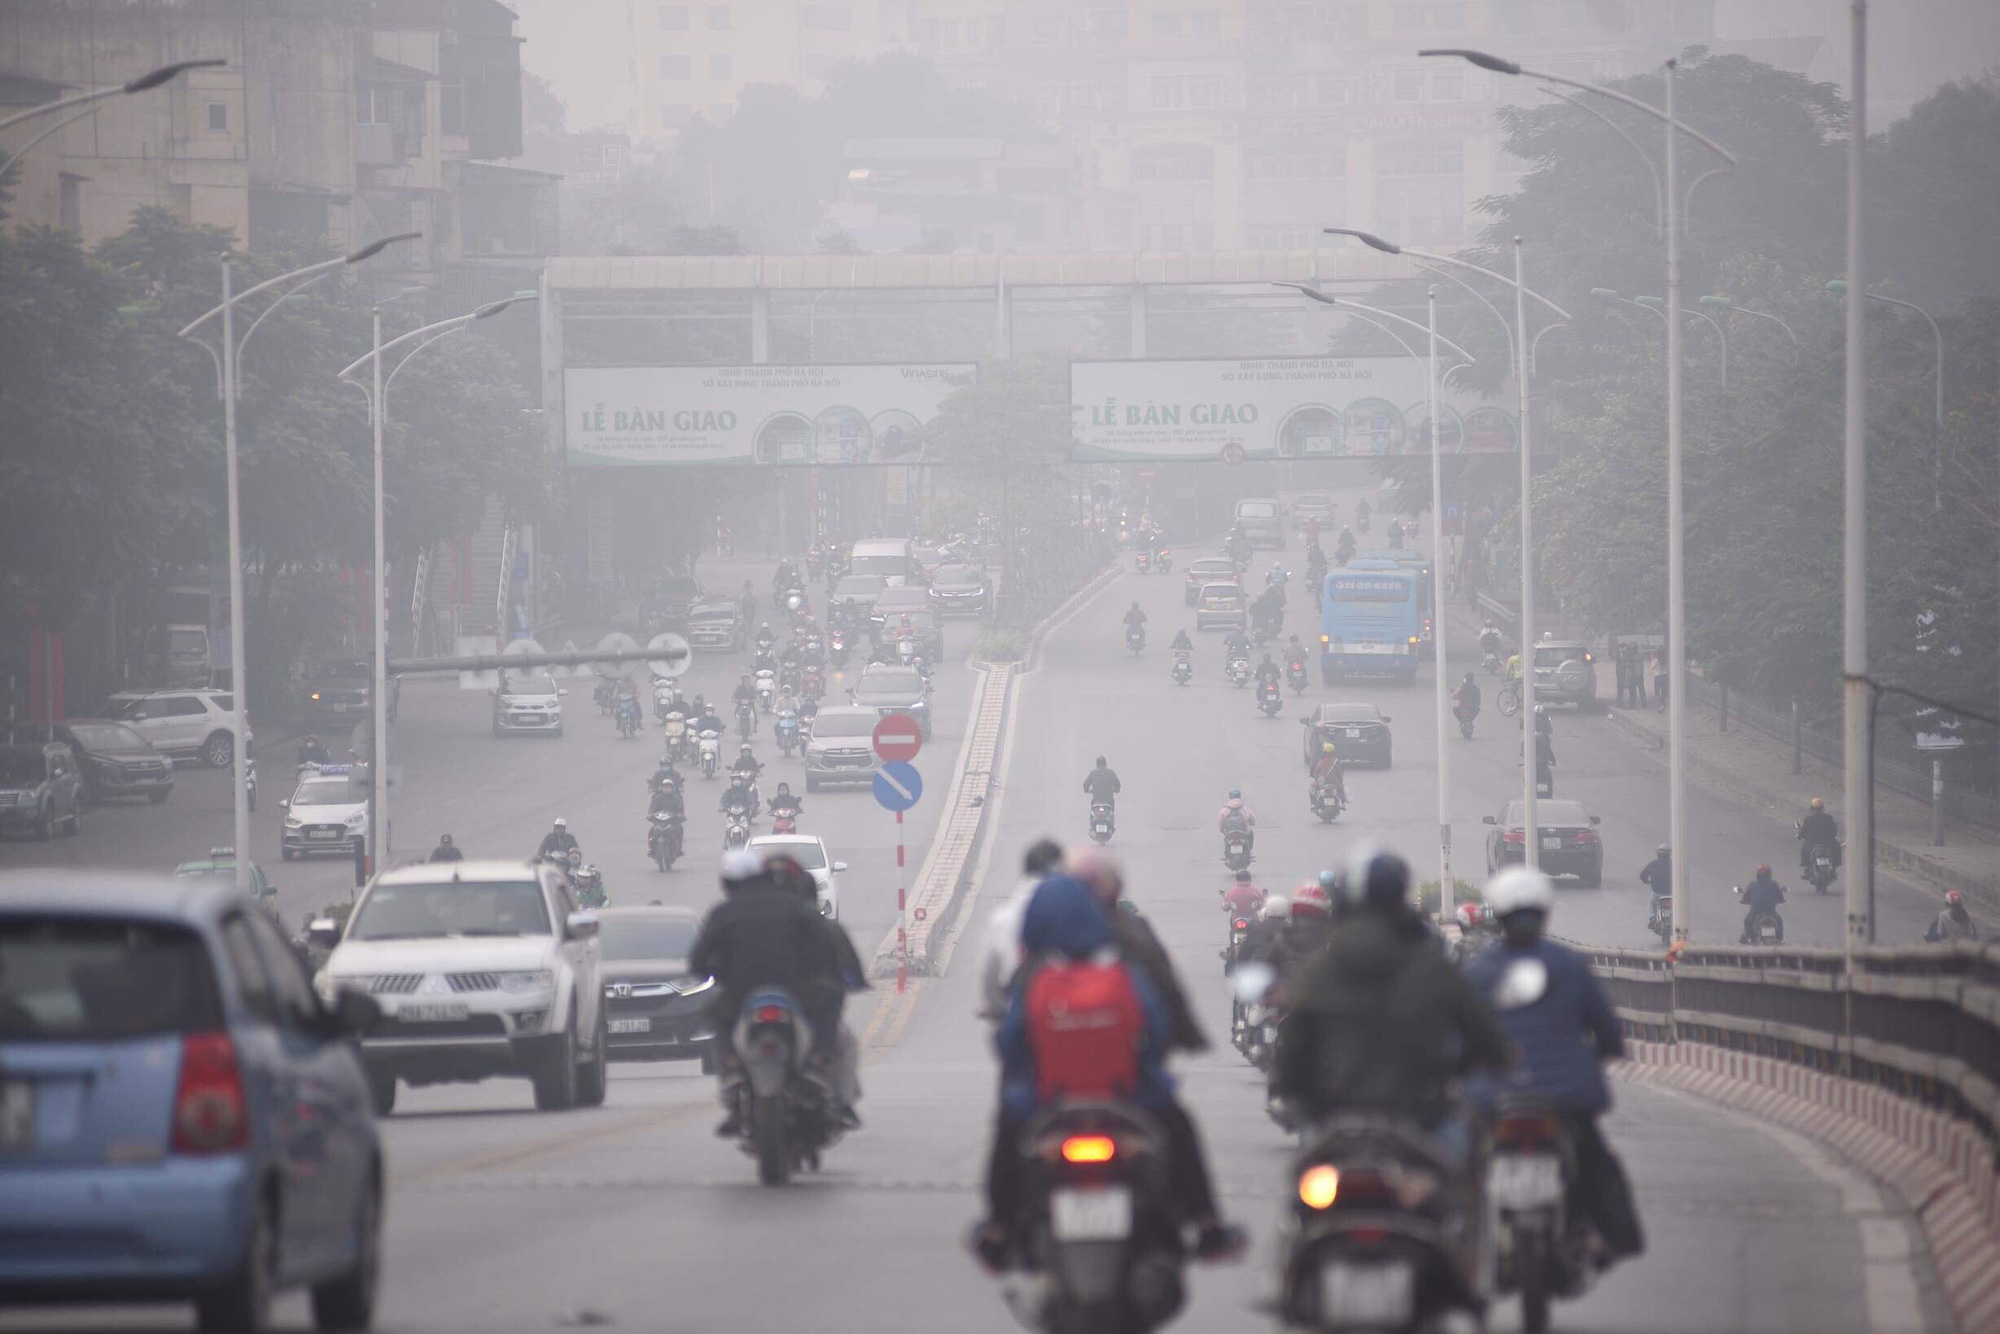 Commuters travel on a street in Hanoi on the morning of December 14, 2019. Photo: Danh Trong / Tuoi Tre